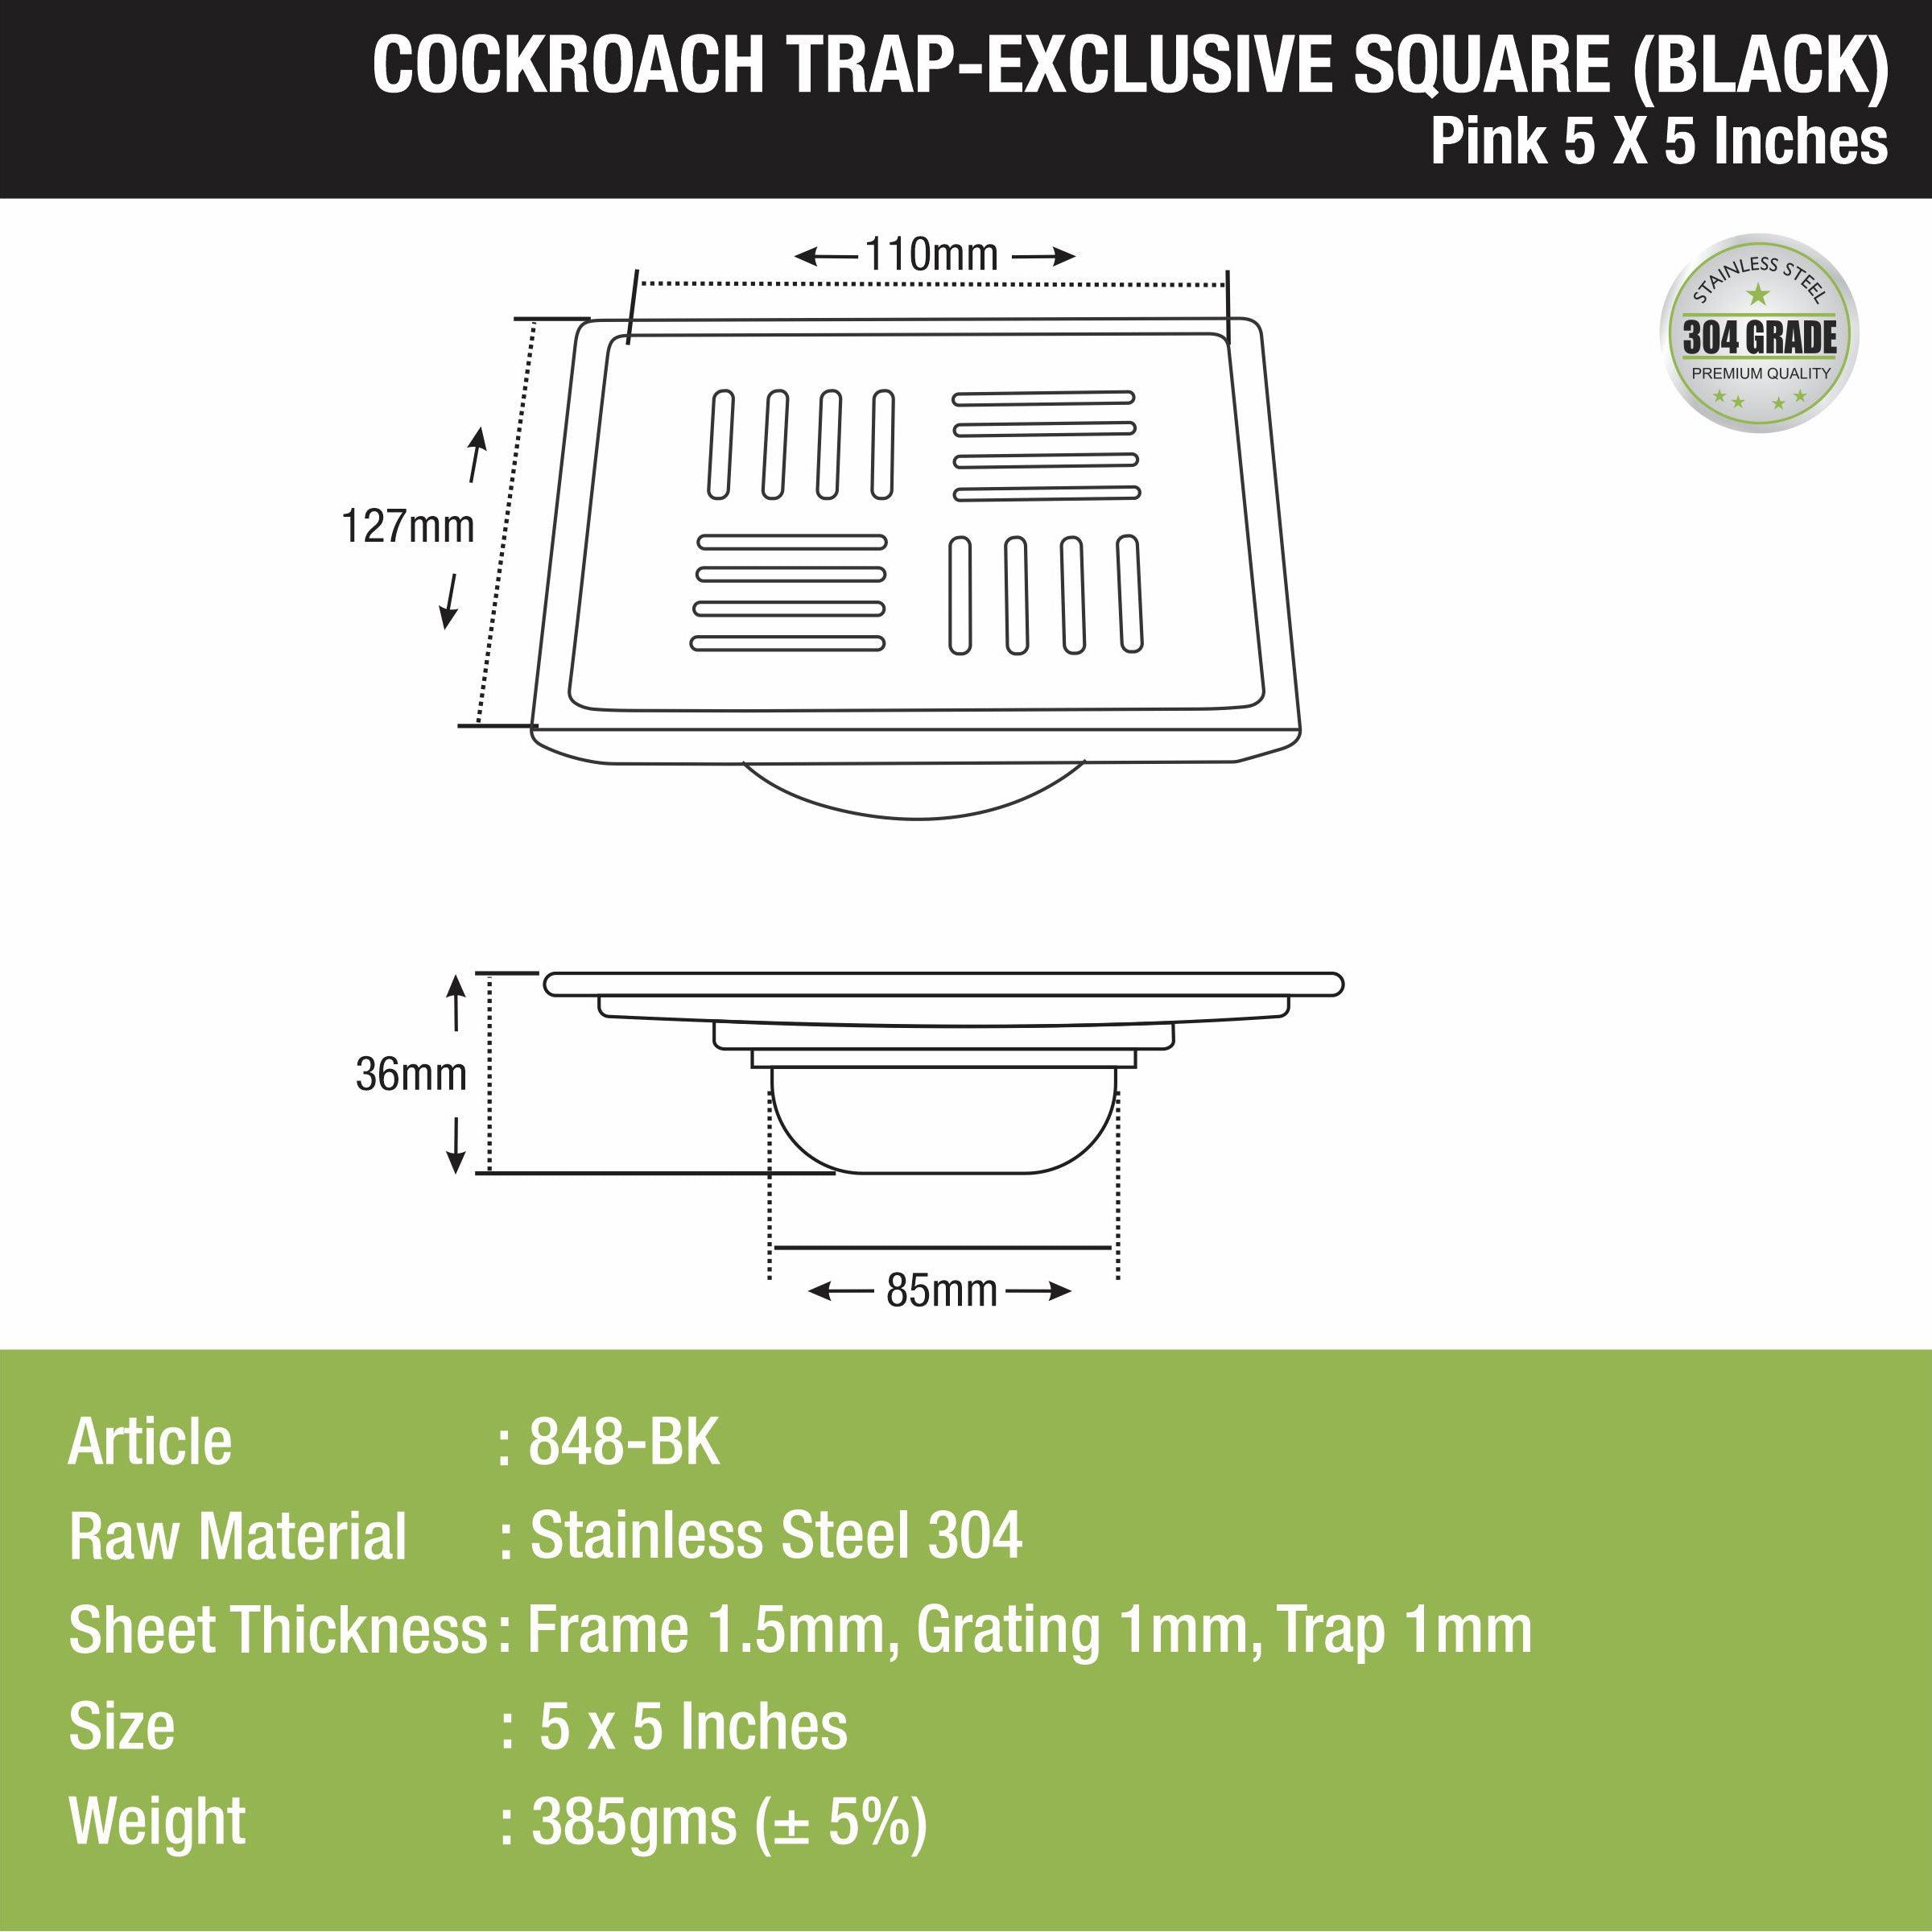 Pink Exclusive Square Floor Drain in Black PVD Coating (5 x 5 Inches) with Cockroach Trap  size and measurement